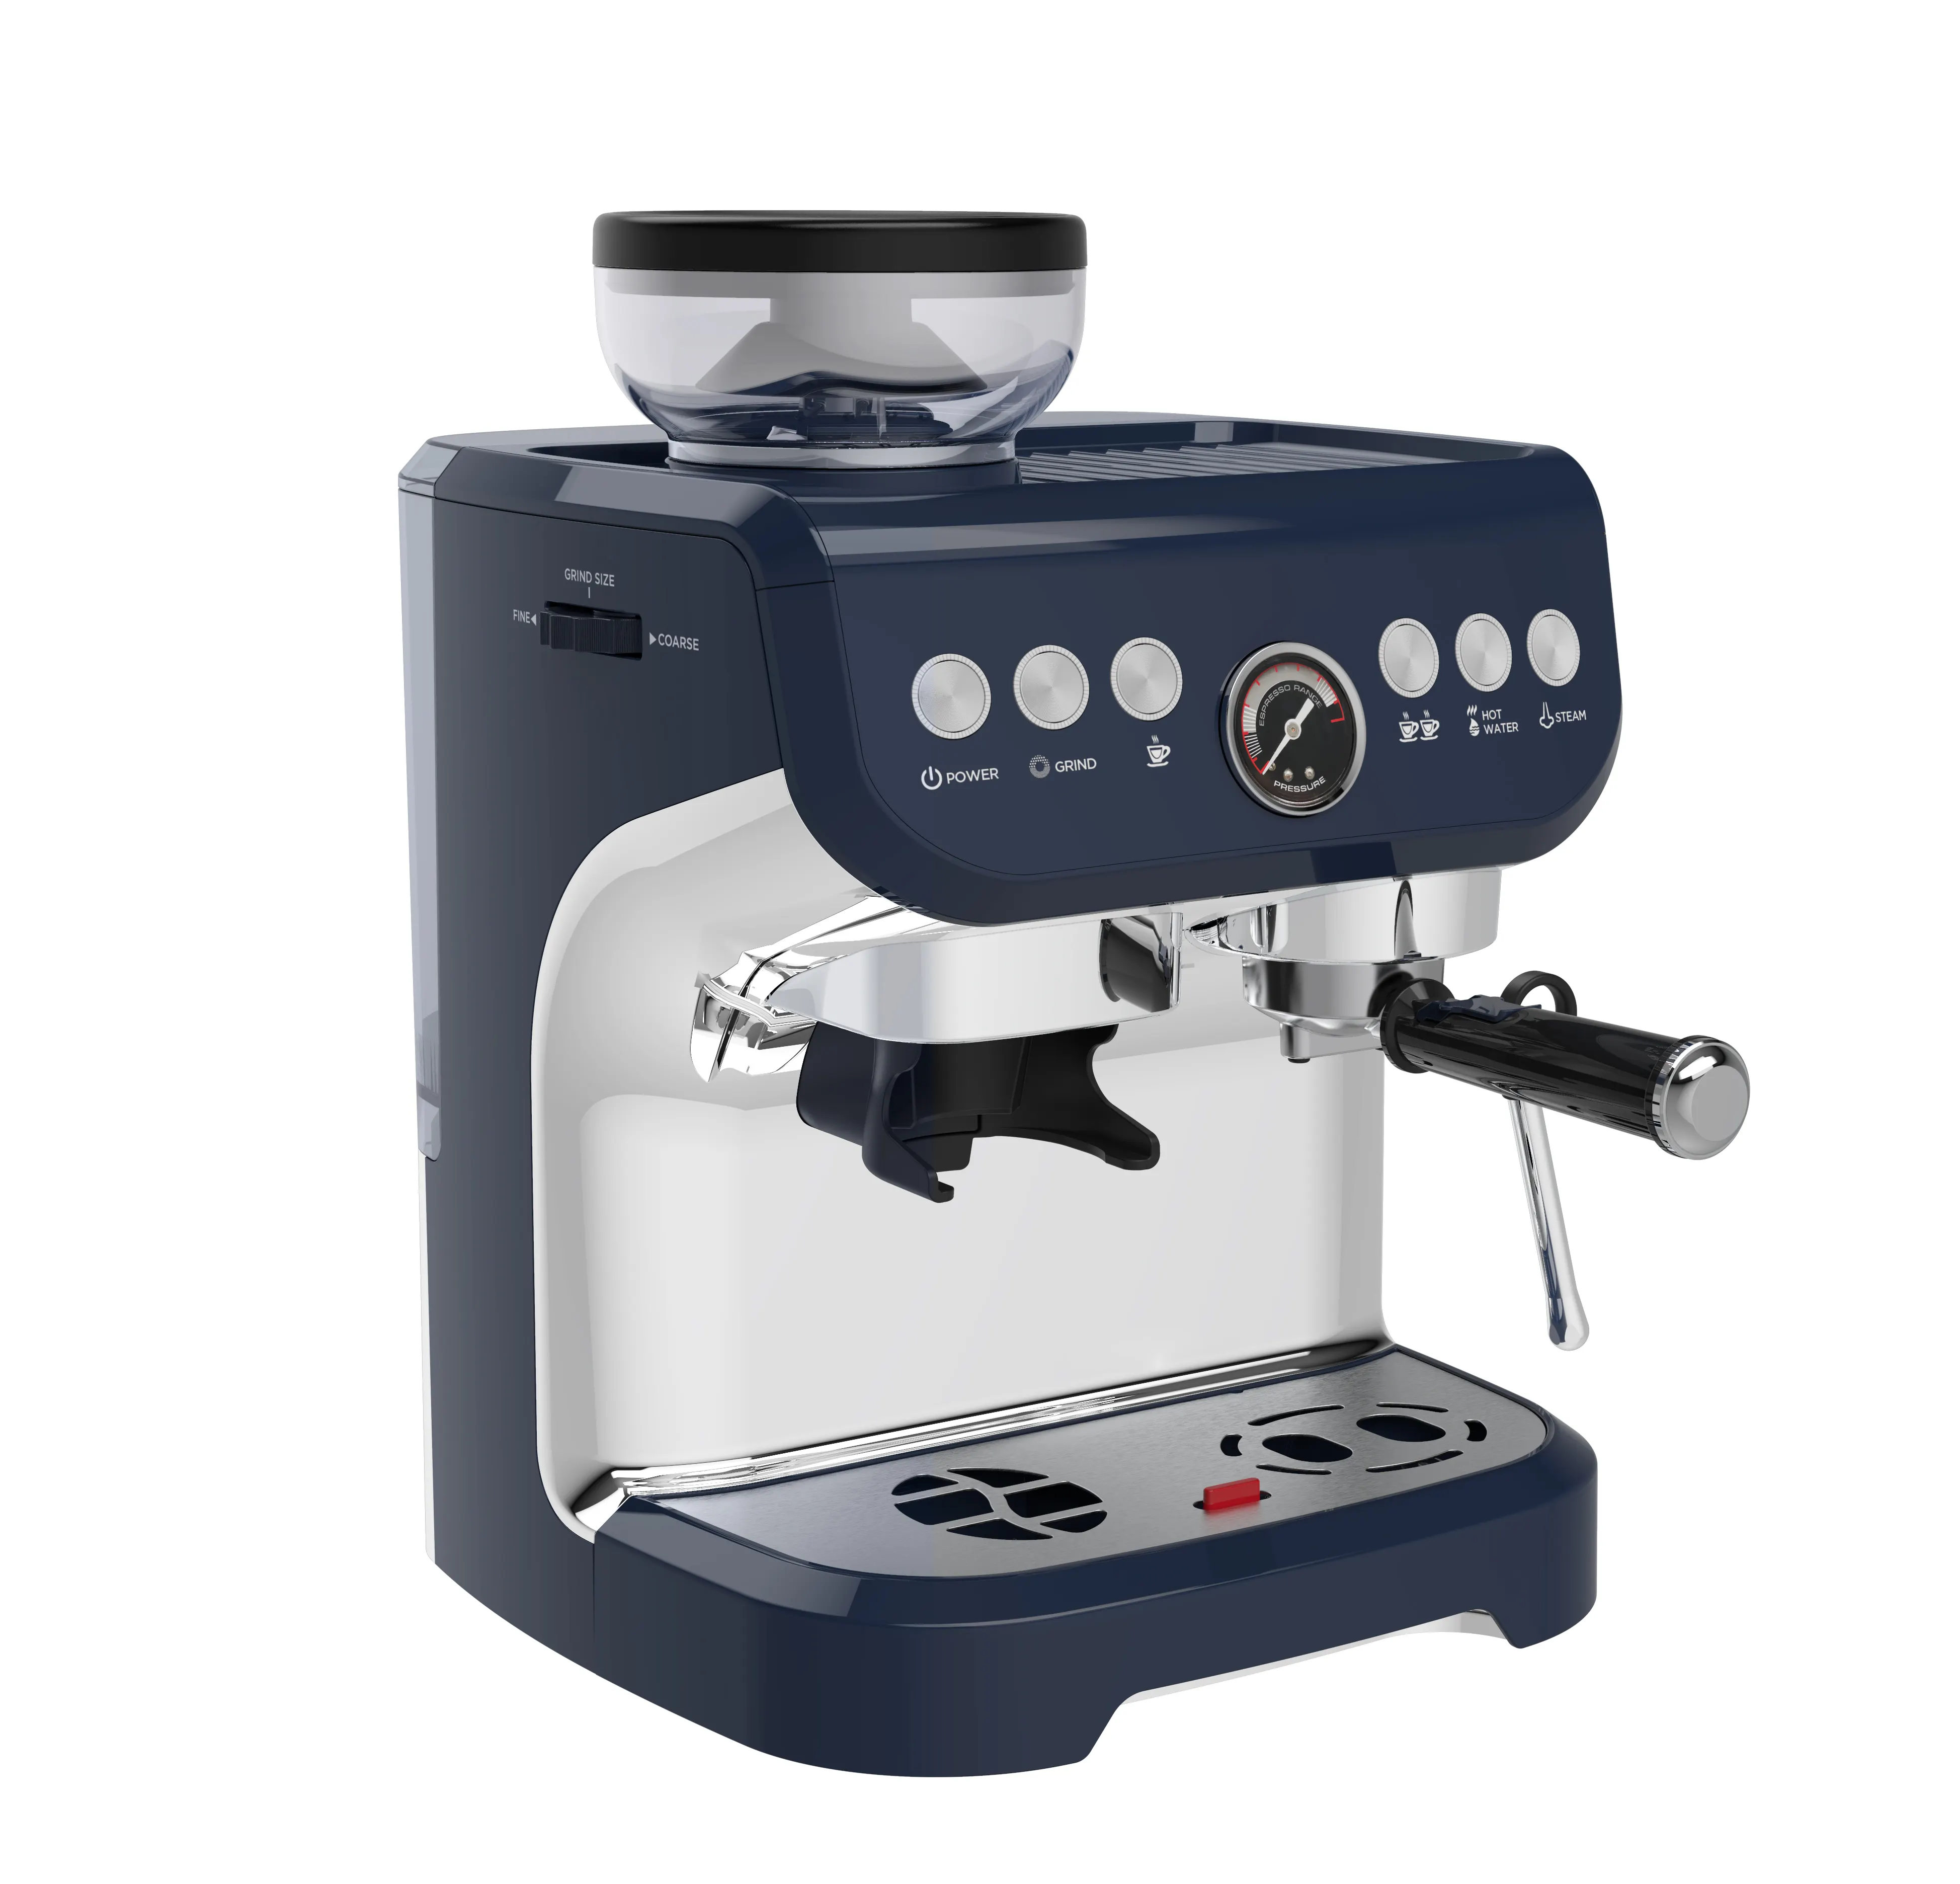 Hotel Room Cafeteira Eletrica Auto Expobar Coffee Machines 3 In 1 Capsule Espresso Coffee Maker With Grinder